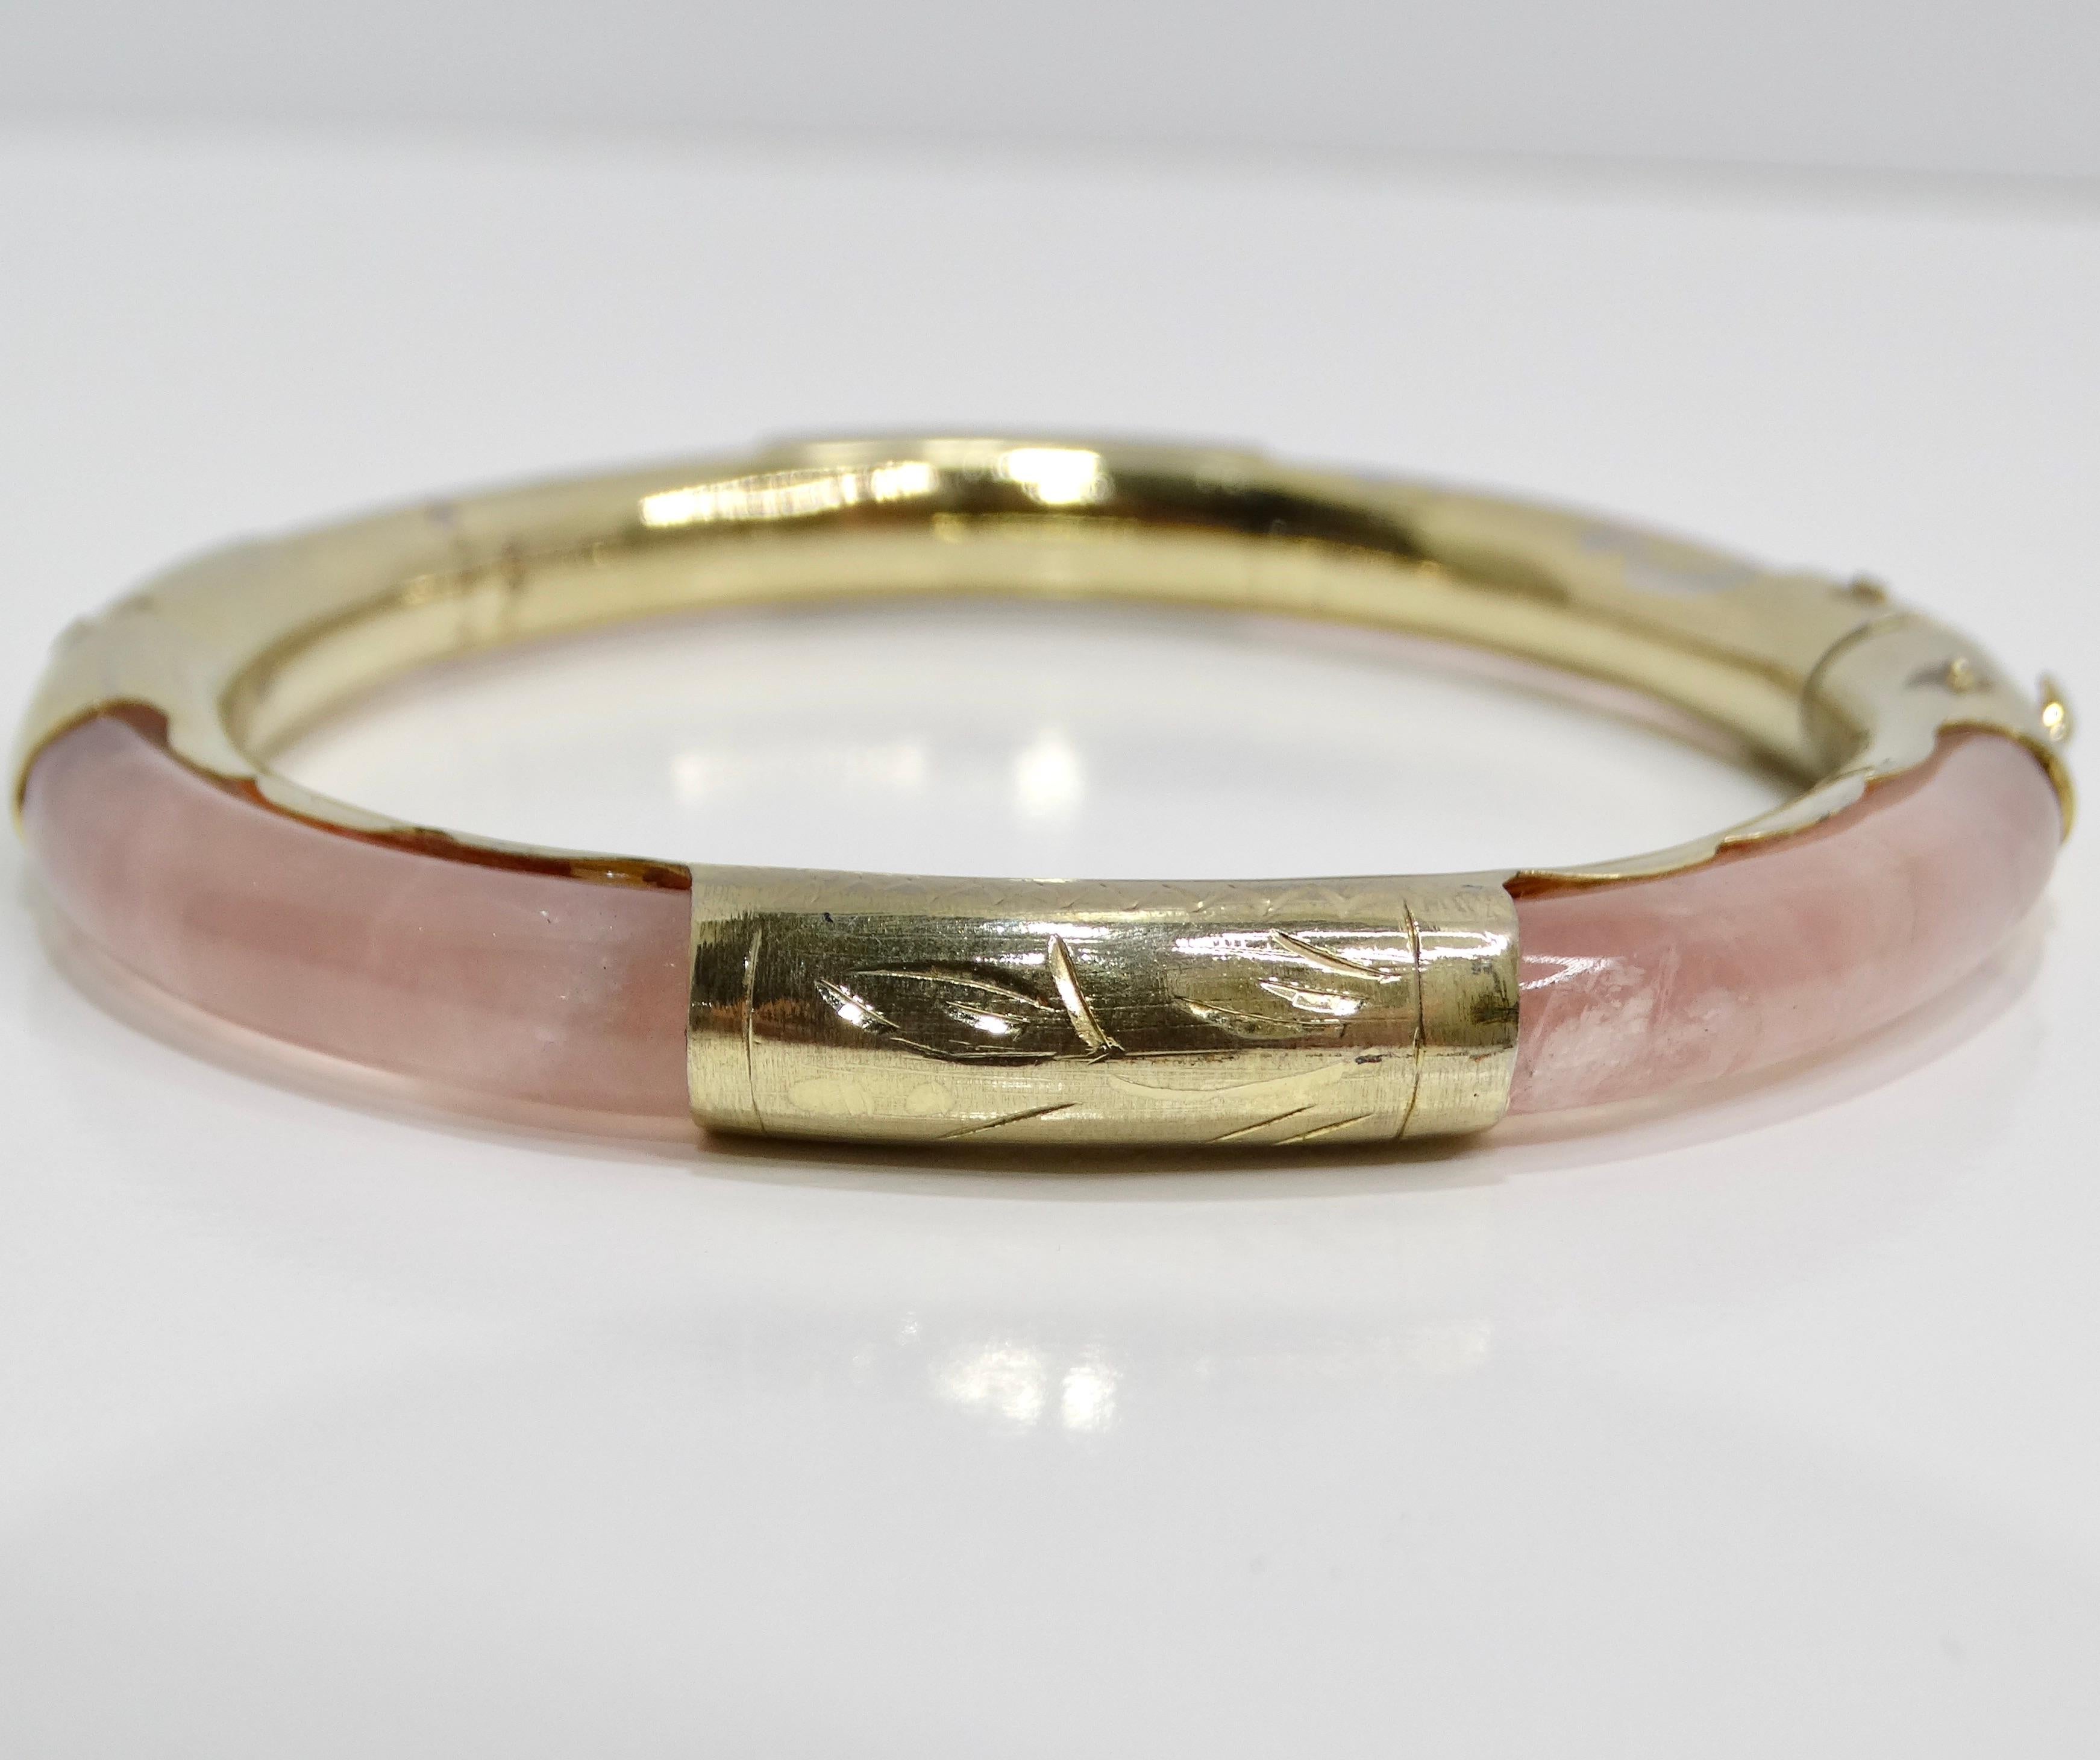 Introducing the 18K Gold Plated Pink Glass Cuff Bracelet, a charming vintage piece from the 1960s that exudes elegance and femininity. This delightful cuff bracelet features a beautiful light pink glass, providing a soft and romantic hue that